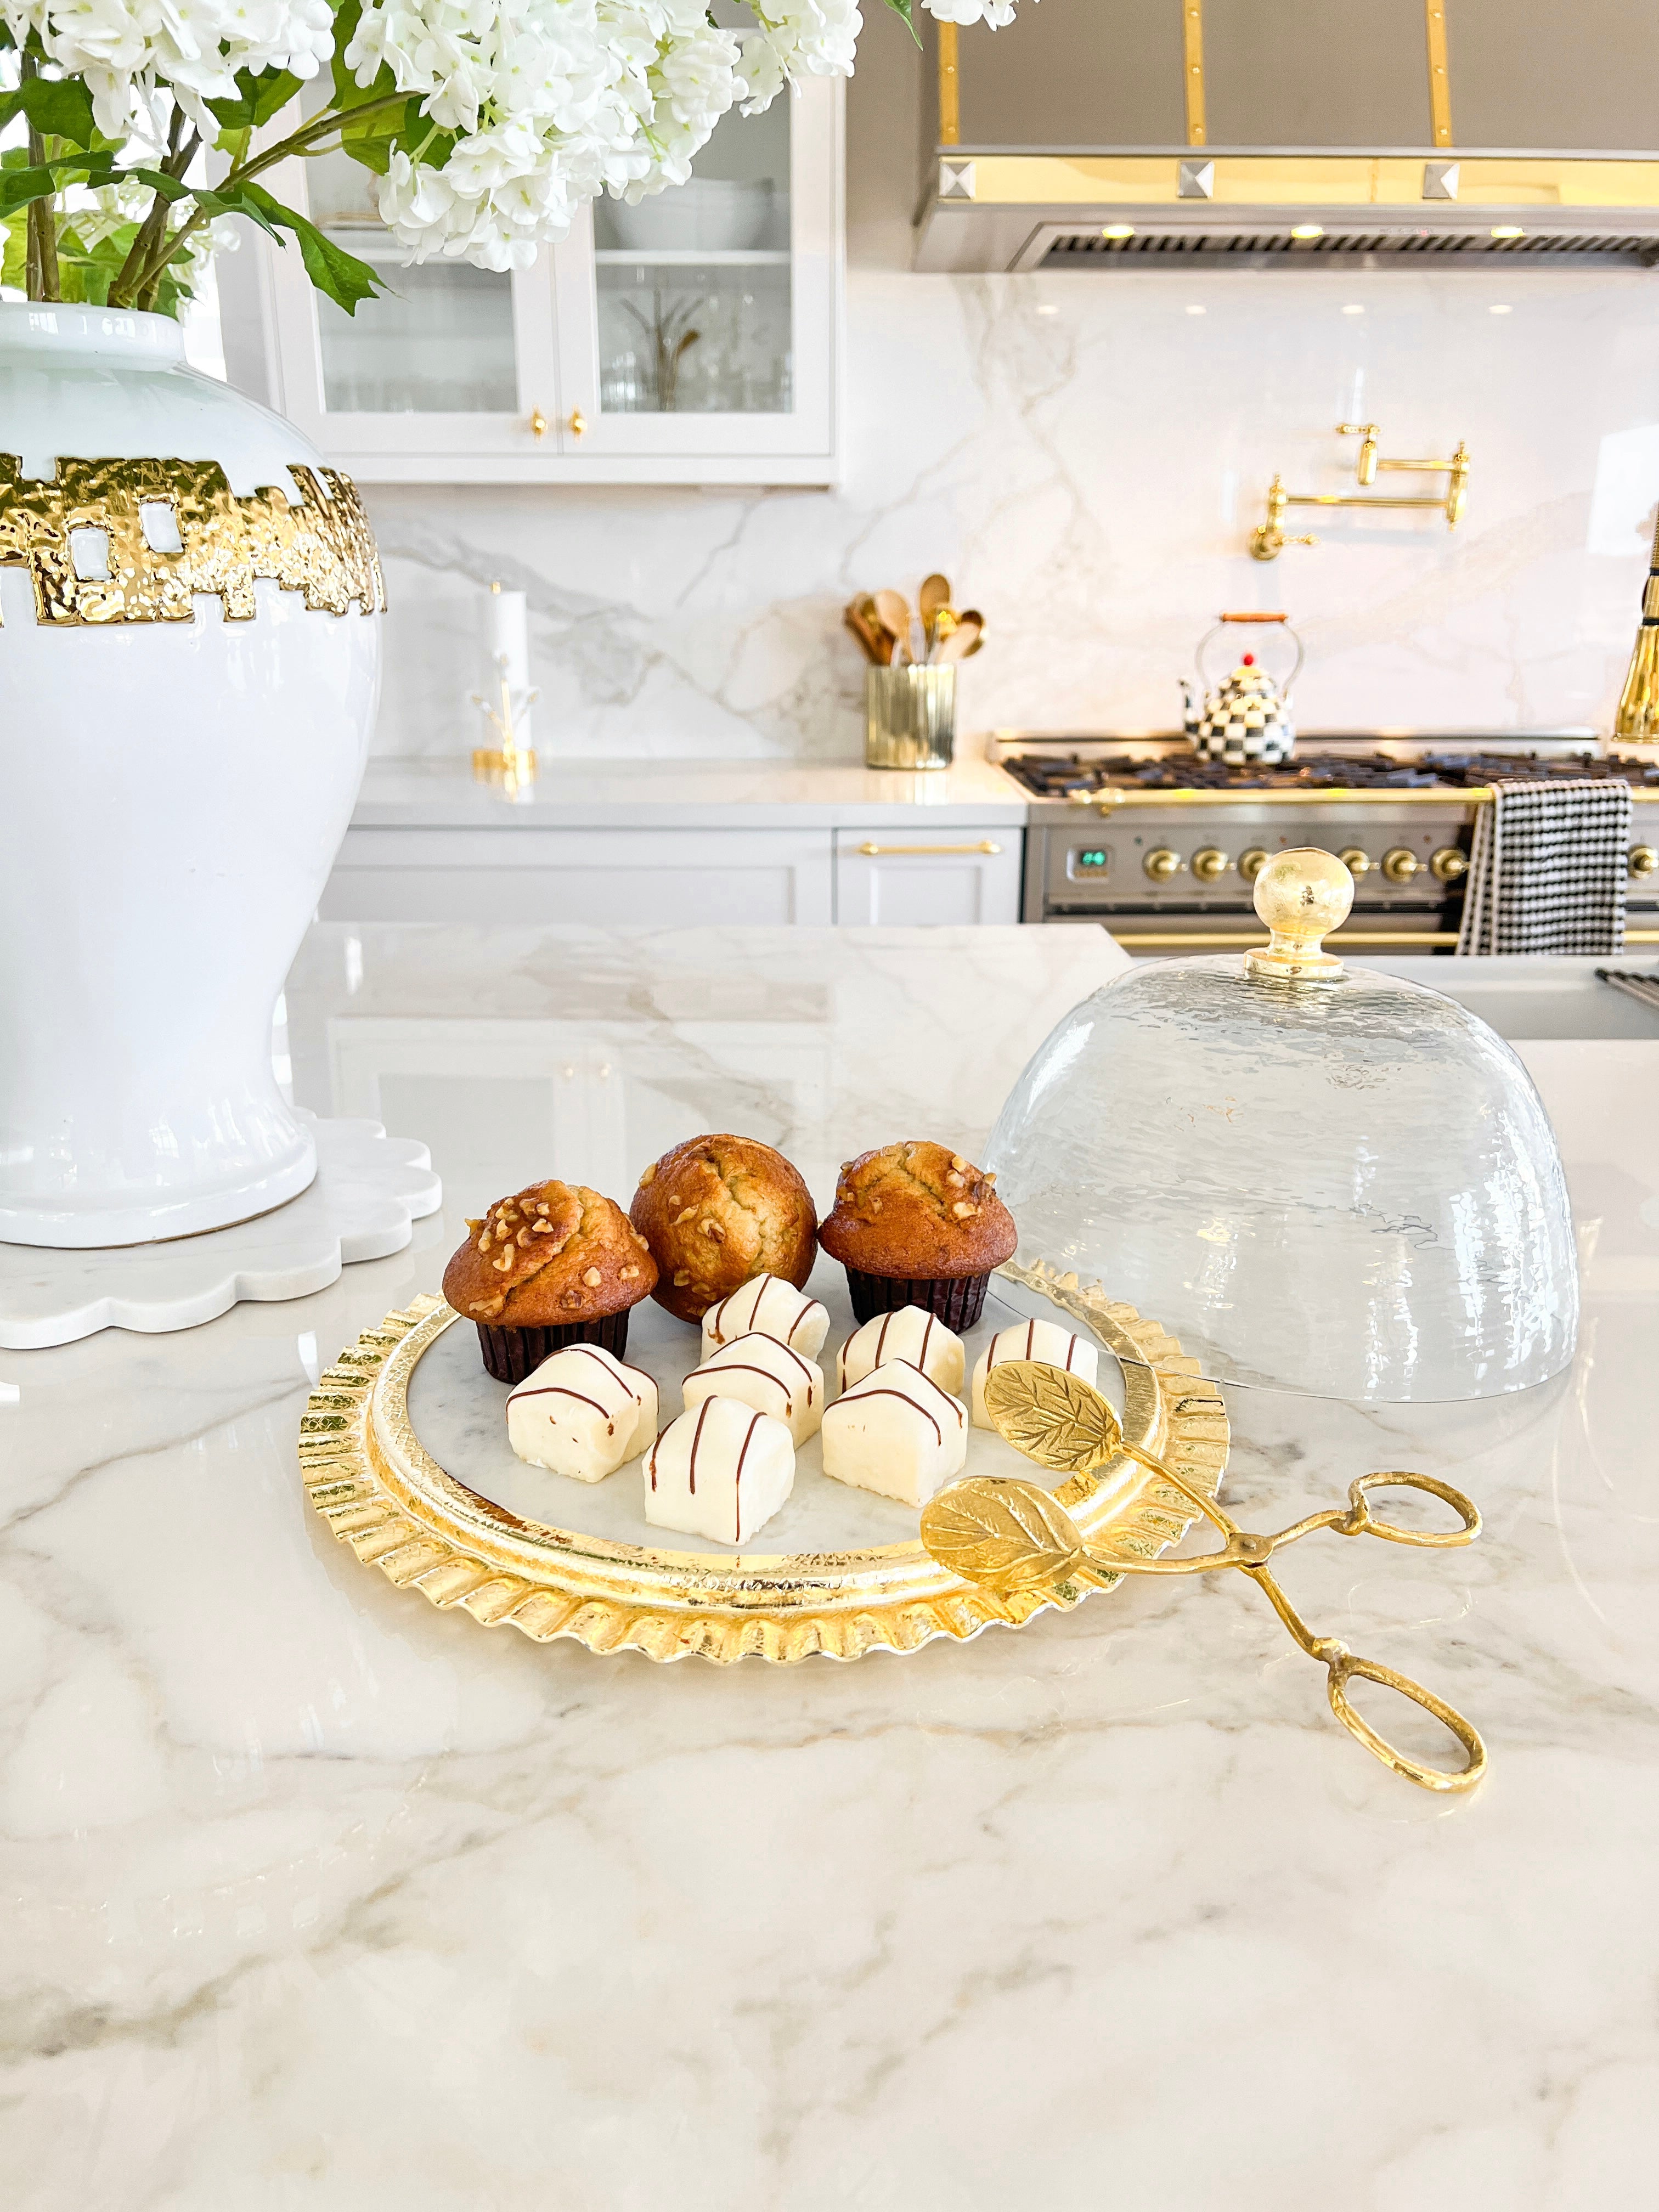 Marble with Gold Hammered Cake Stand with Glass Dome